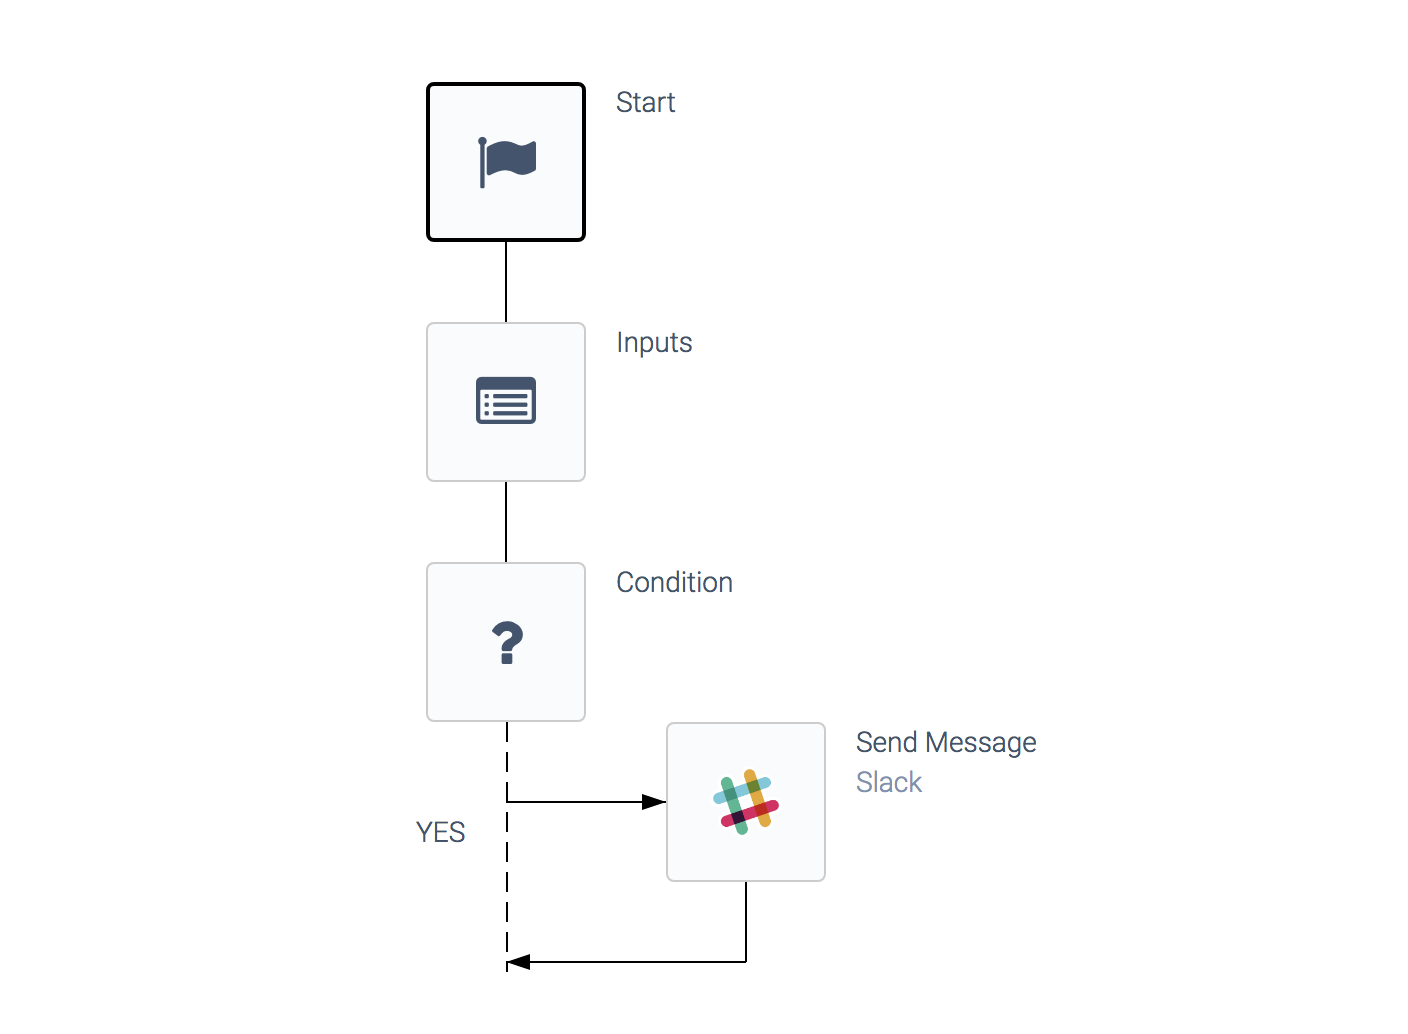 an automation consisting of a Start block, an Inputs block, and a Condition block leading to a Send Message block.